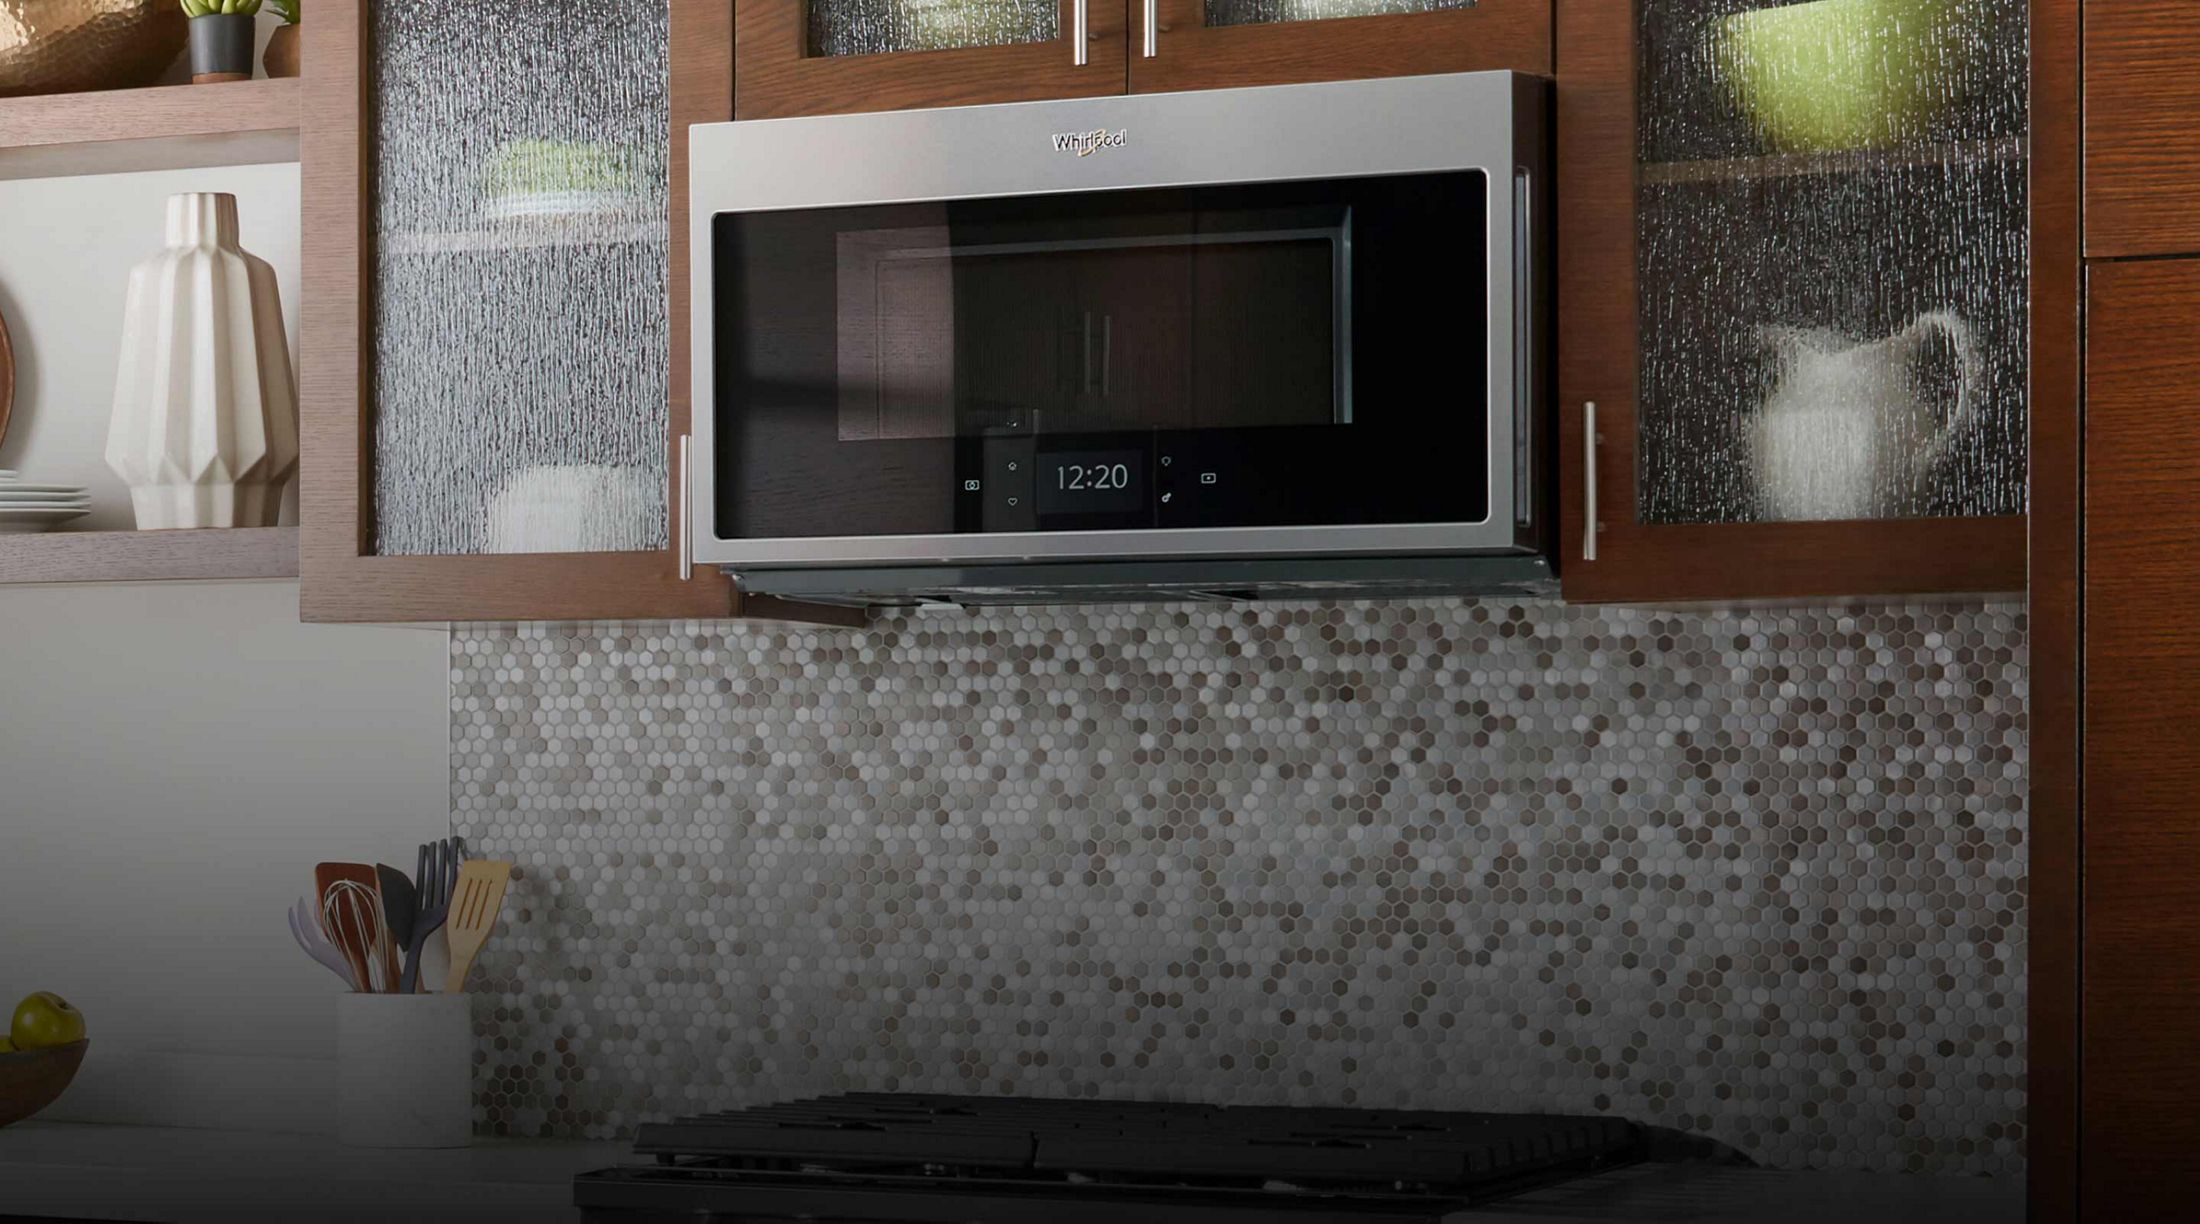 Whirlpool® Smart Microwave Hood Combination in a kitchen